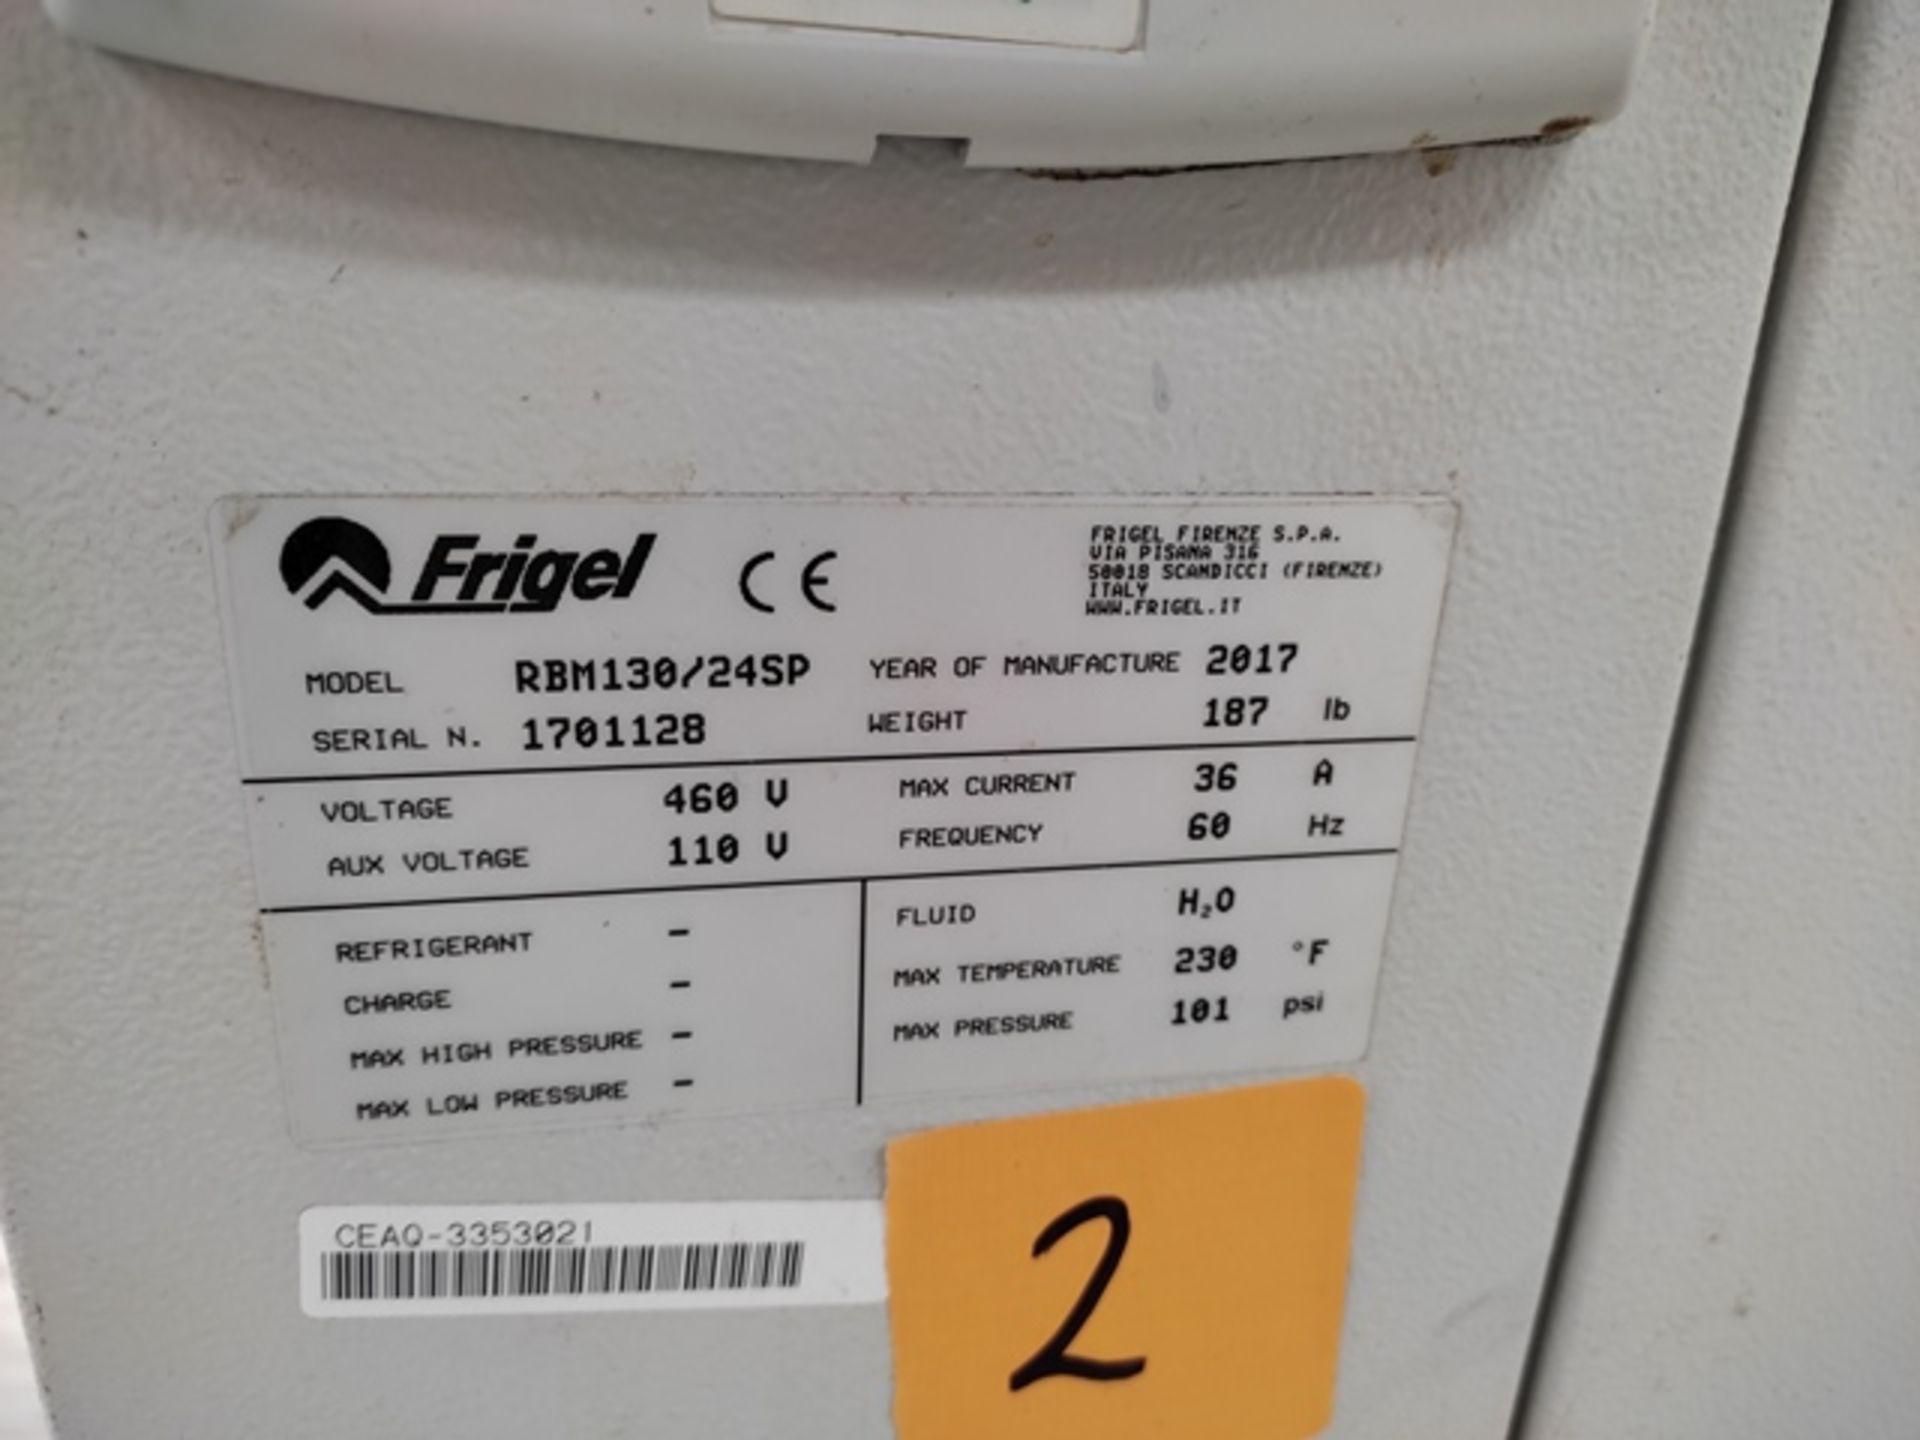 Lot of: (2) Frigel RBM130/24 SP 24 KW Flow Booster Temperature Controllers, Mfg. Year: 2017 - Image 9 of 9